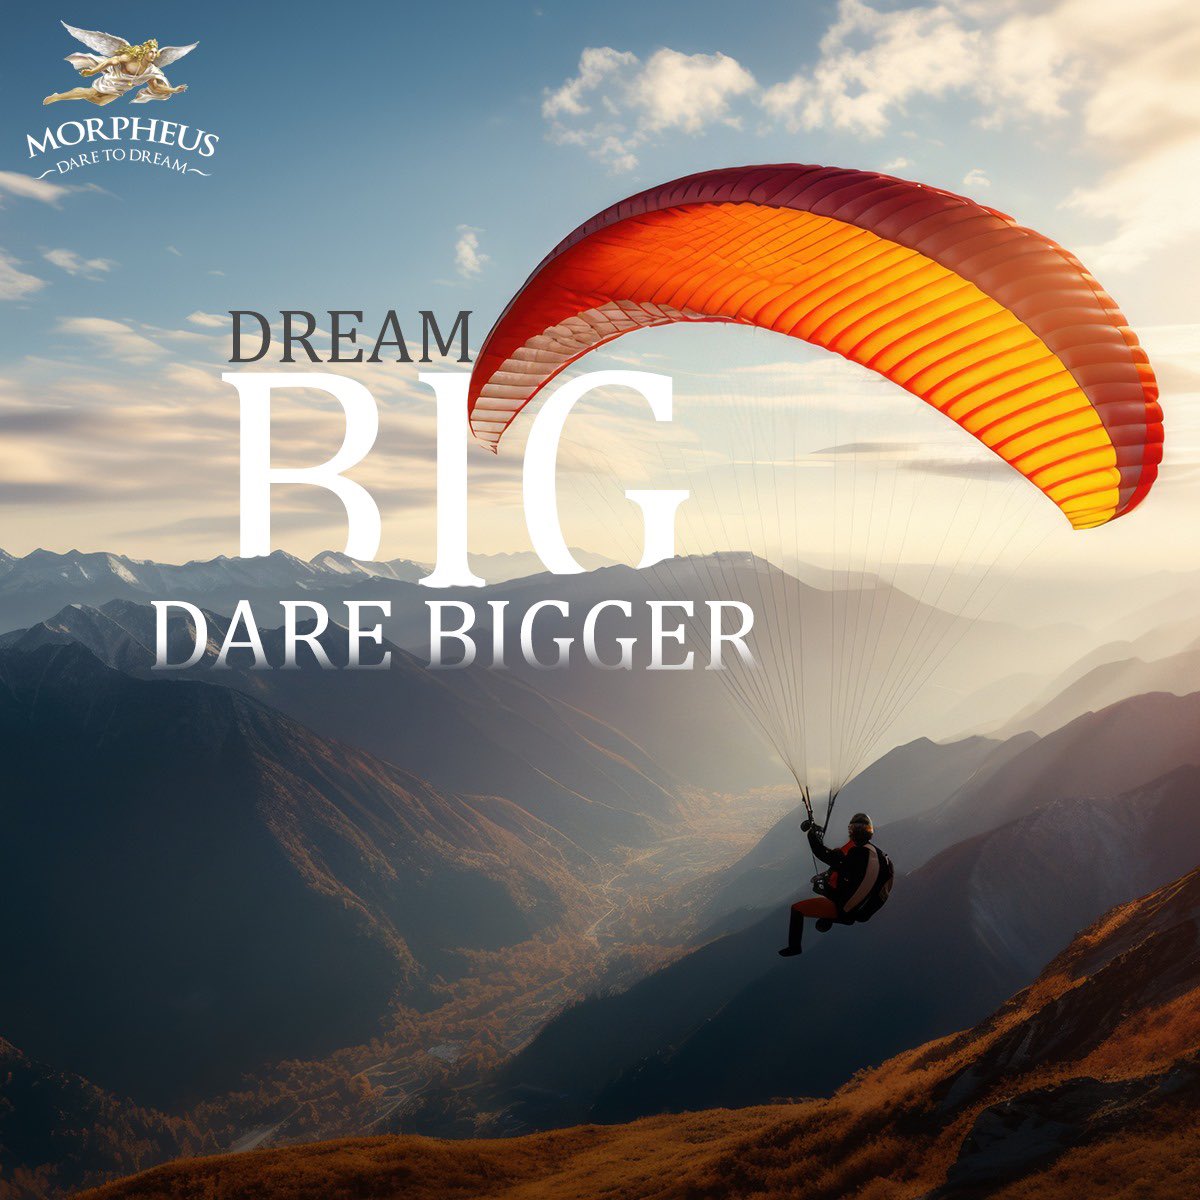 With a Dare To Dream spirit, clinch the sky and be empowered to make all your dreams come true.

#MorpheusBrandy #MorpheusXOBrandy #Brandy #MorpheusDareToDream #DareToDream #LargestSellingBrandy